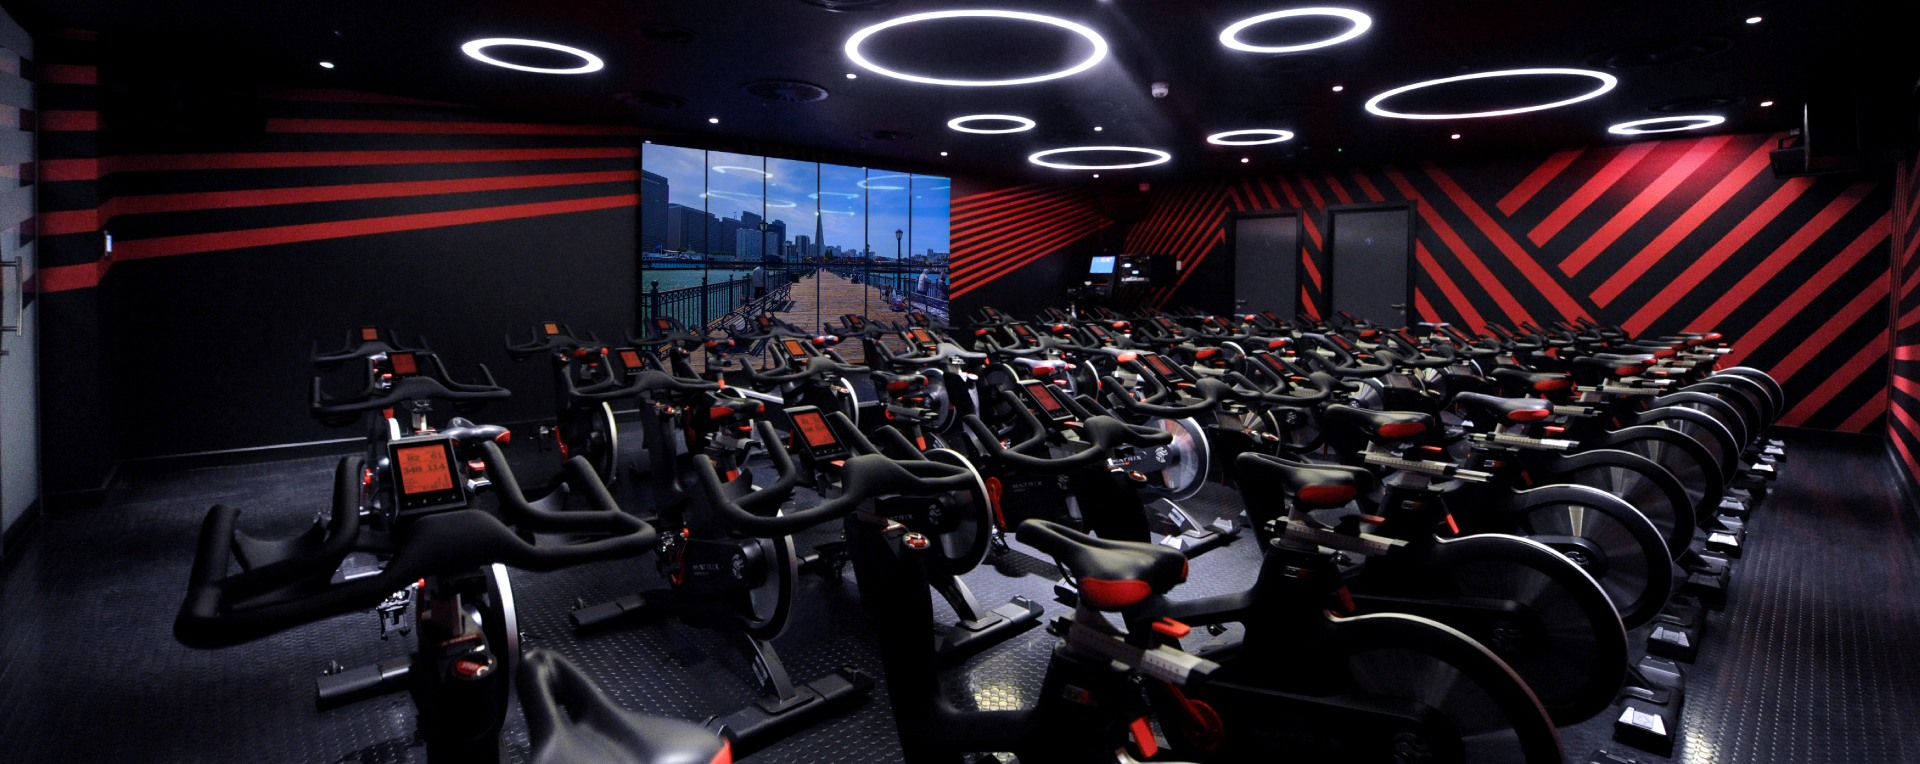 Life Fitness Spin room